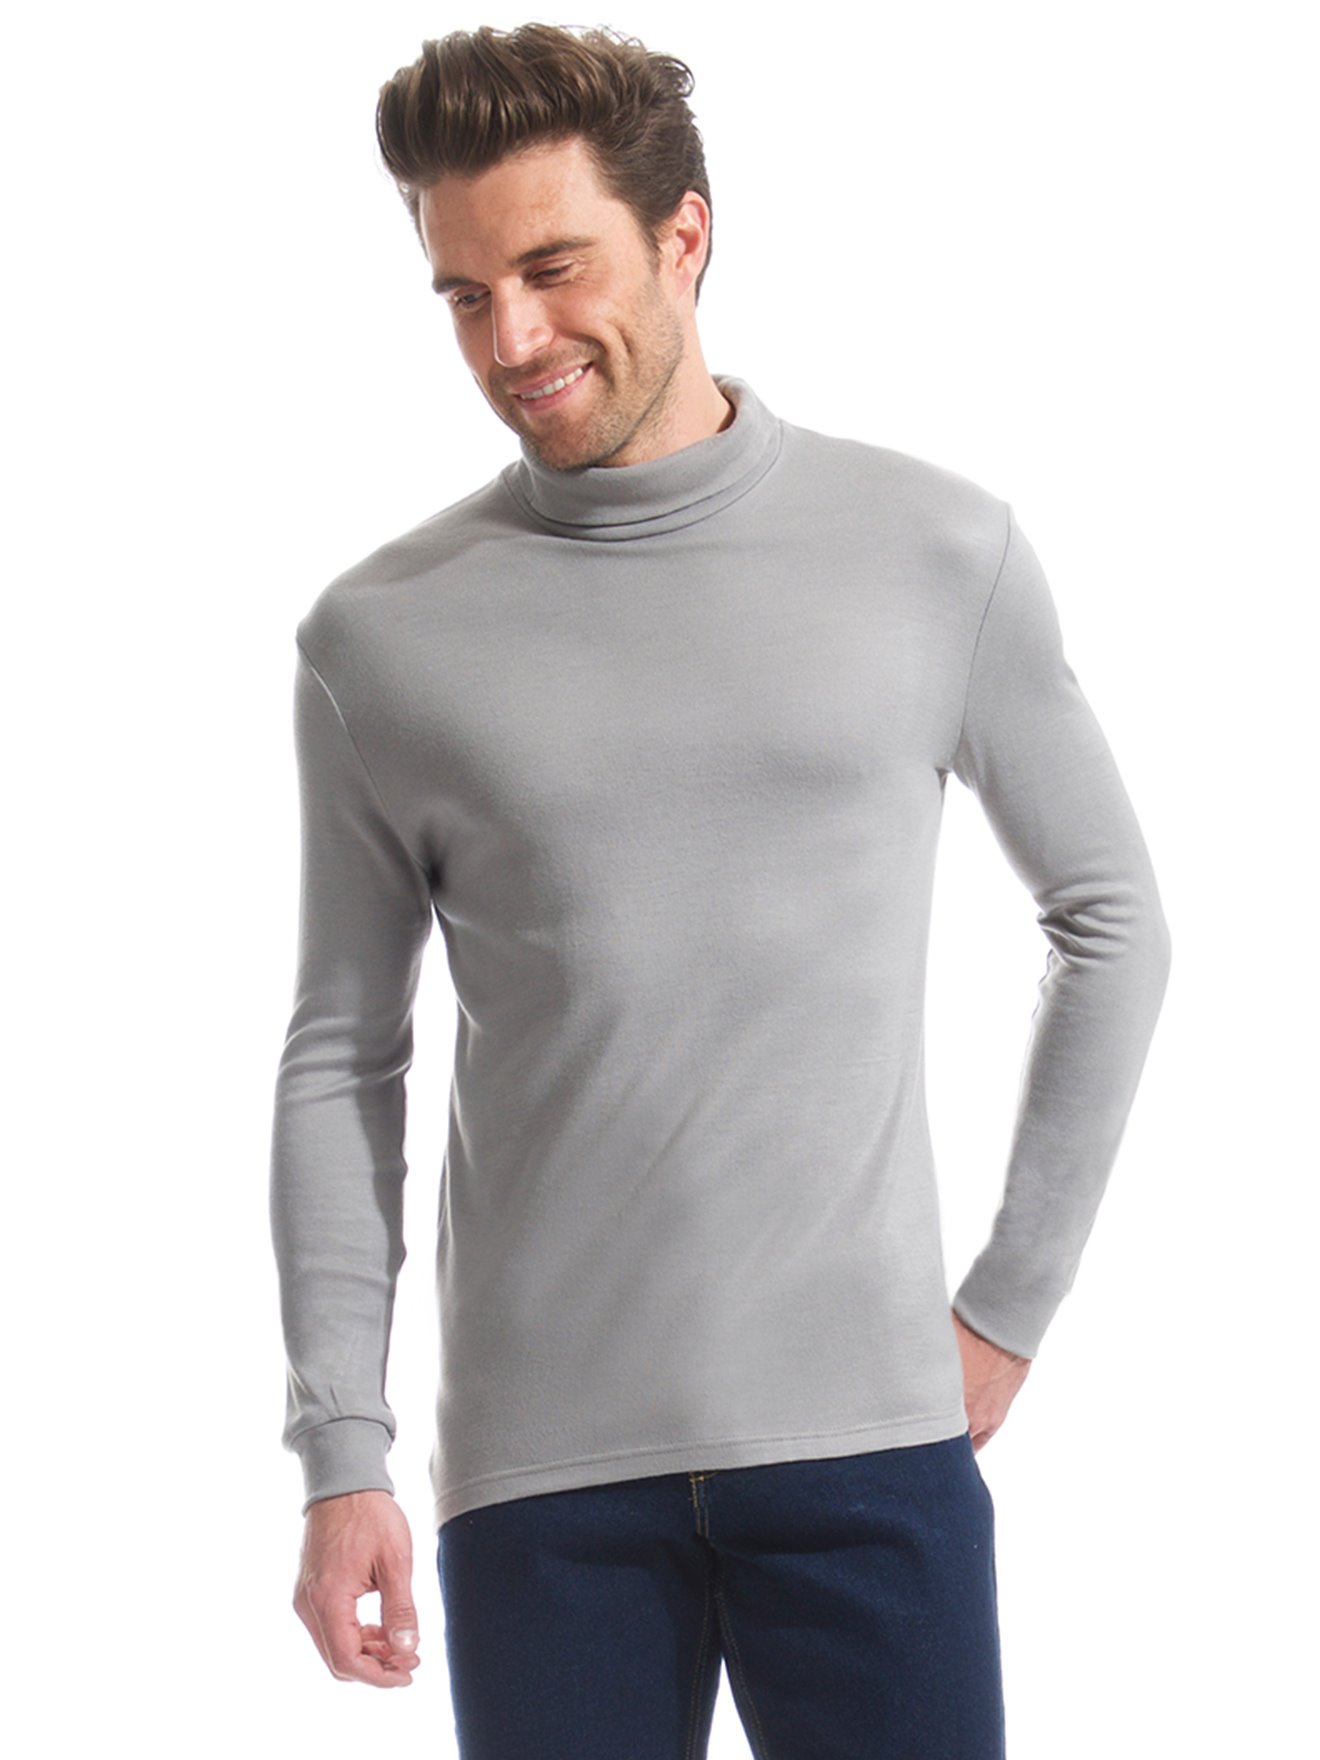 sous pull homme sport